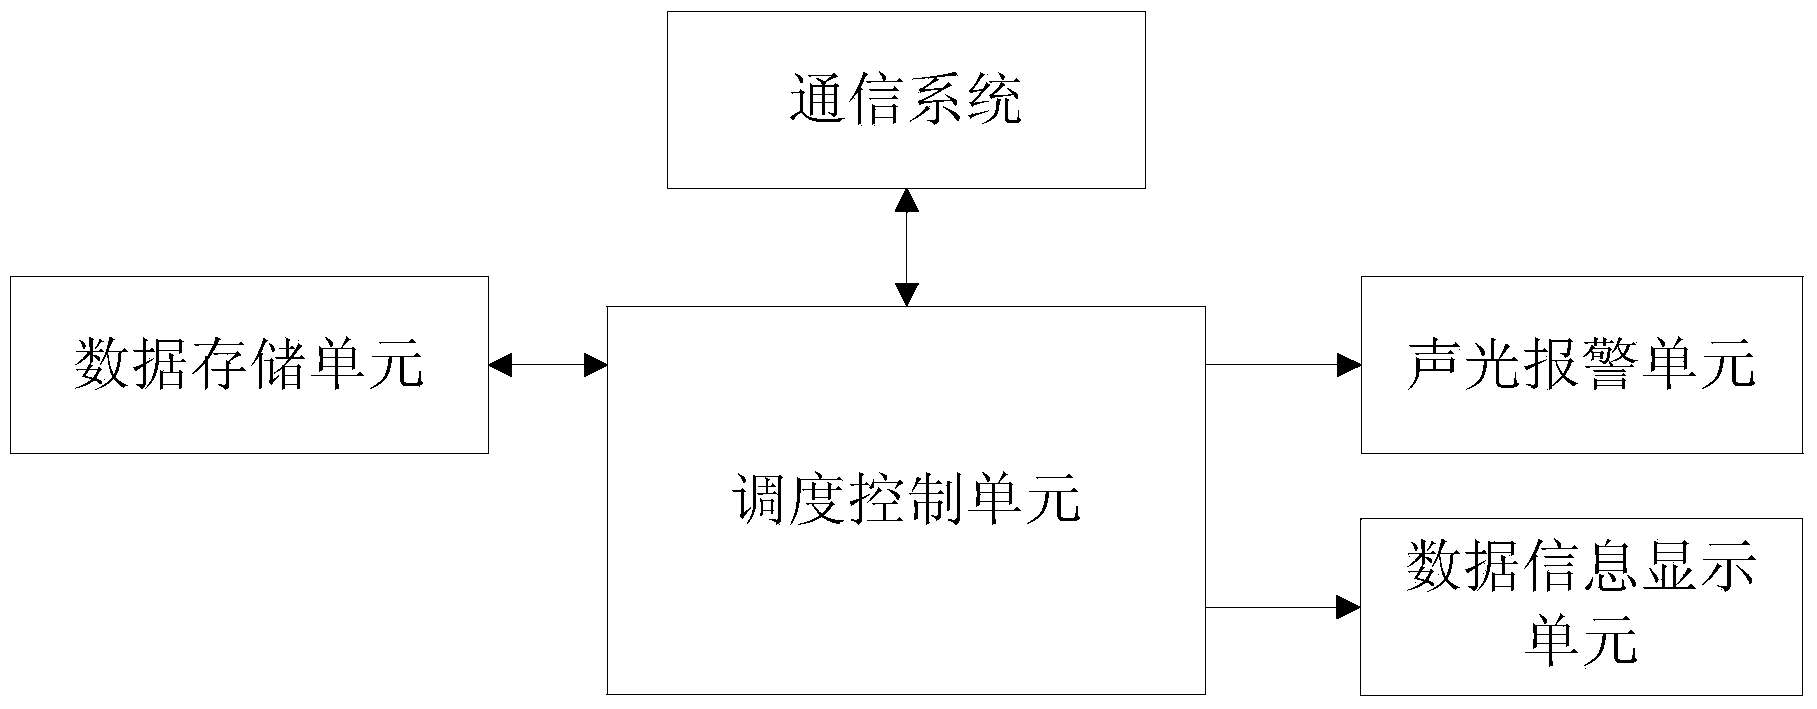 Intelligent scheduling system and scheduling method for electric locomotive with accumulator for coal mine